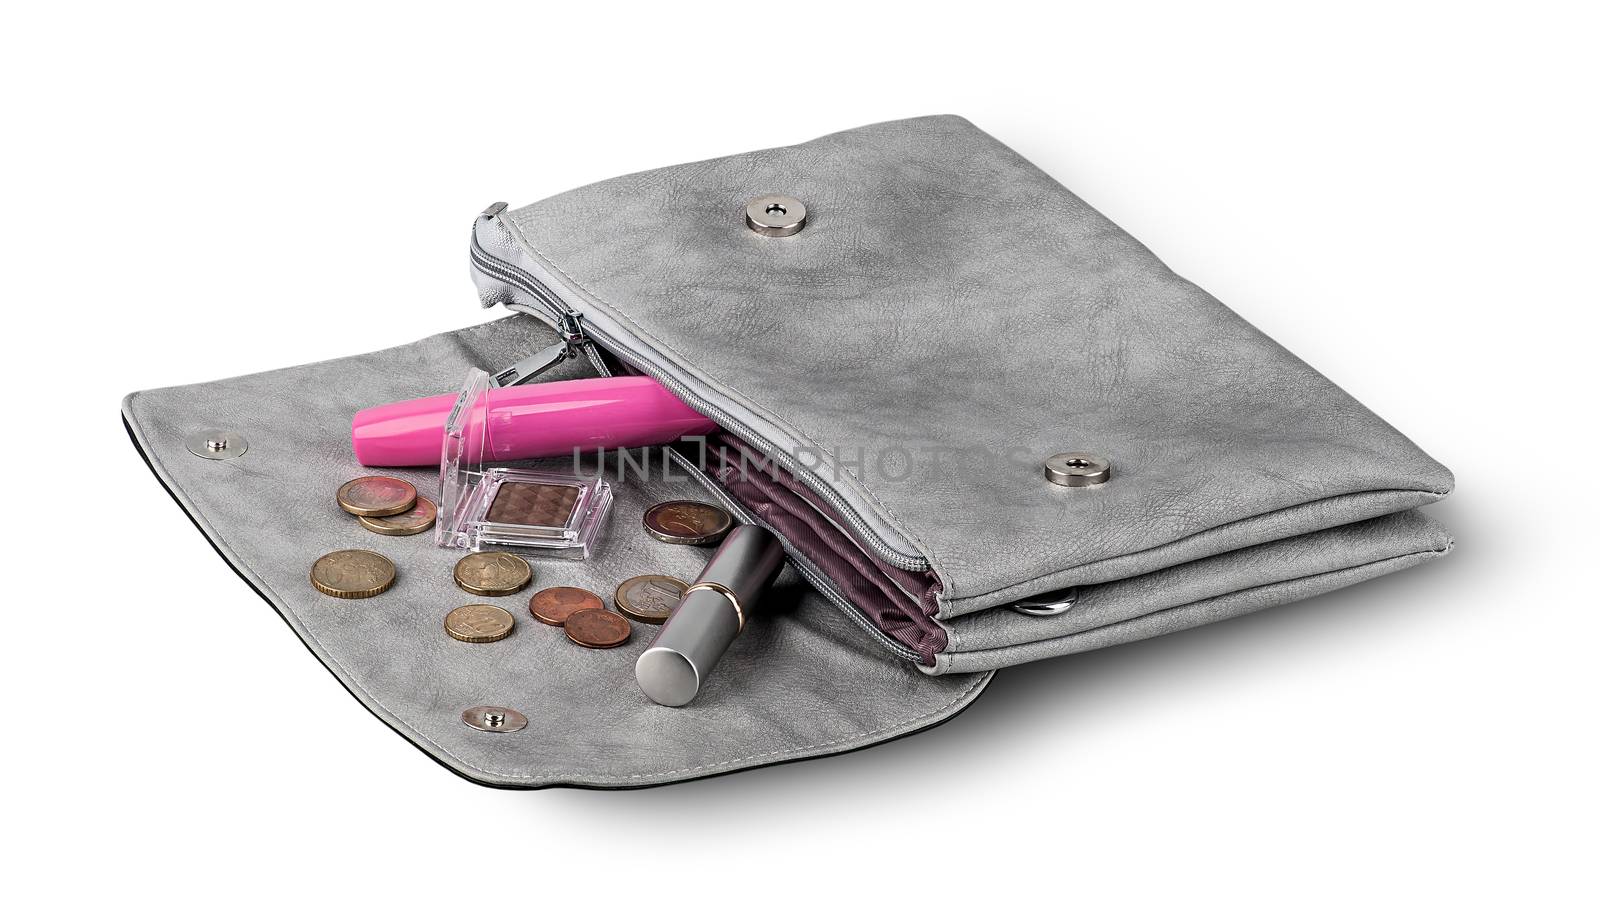 Open gray bag clutch. Cosmetics and coins nearby. Isolated on white background.